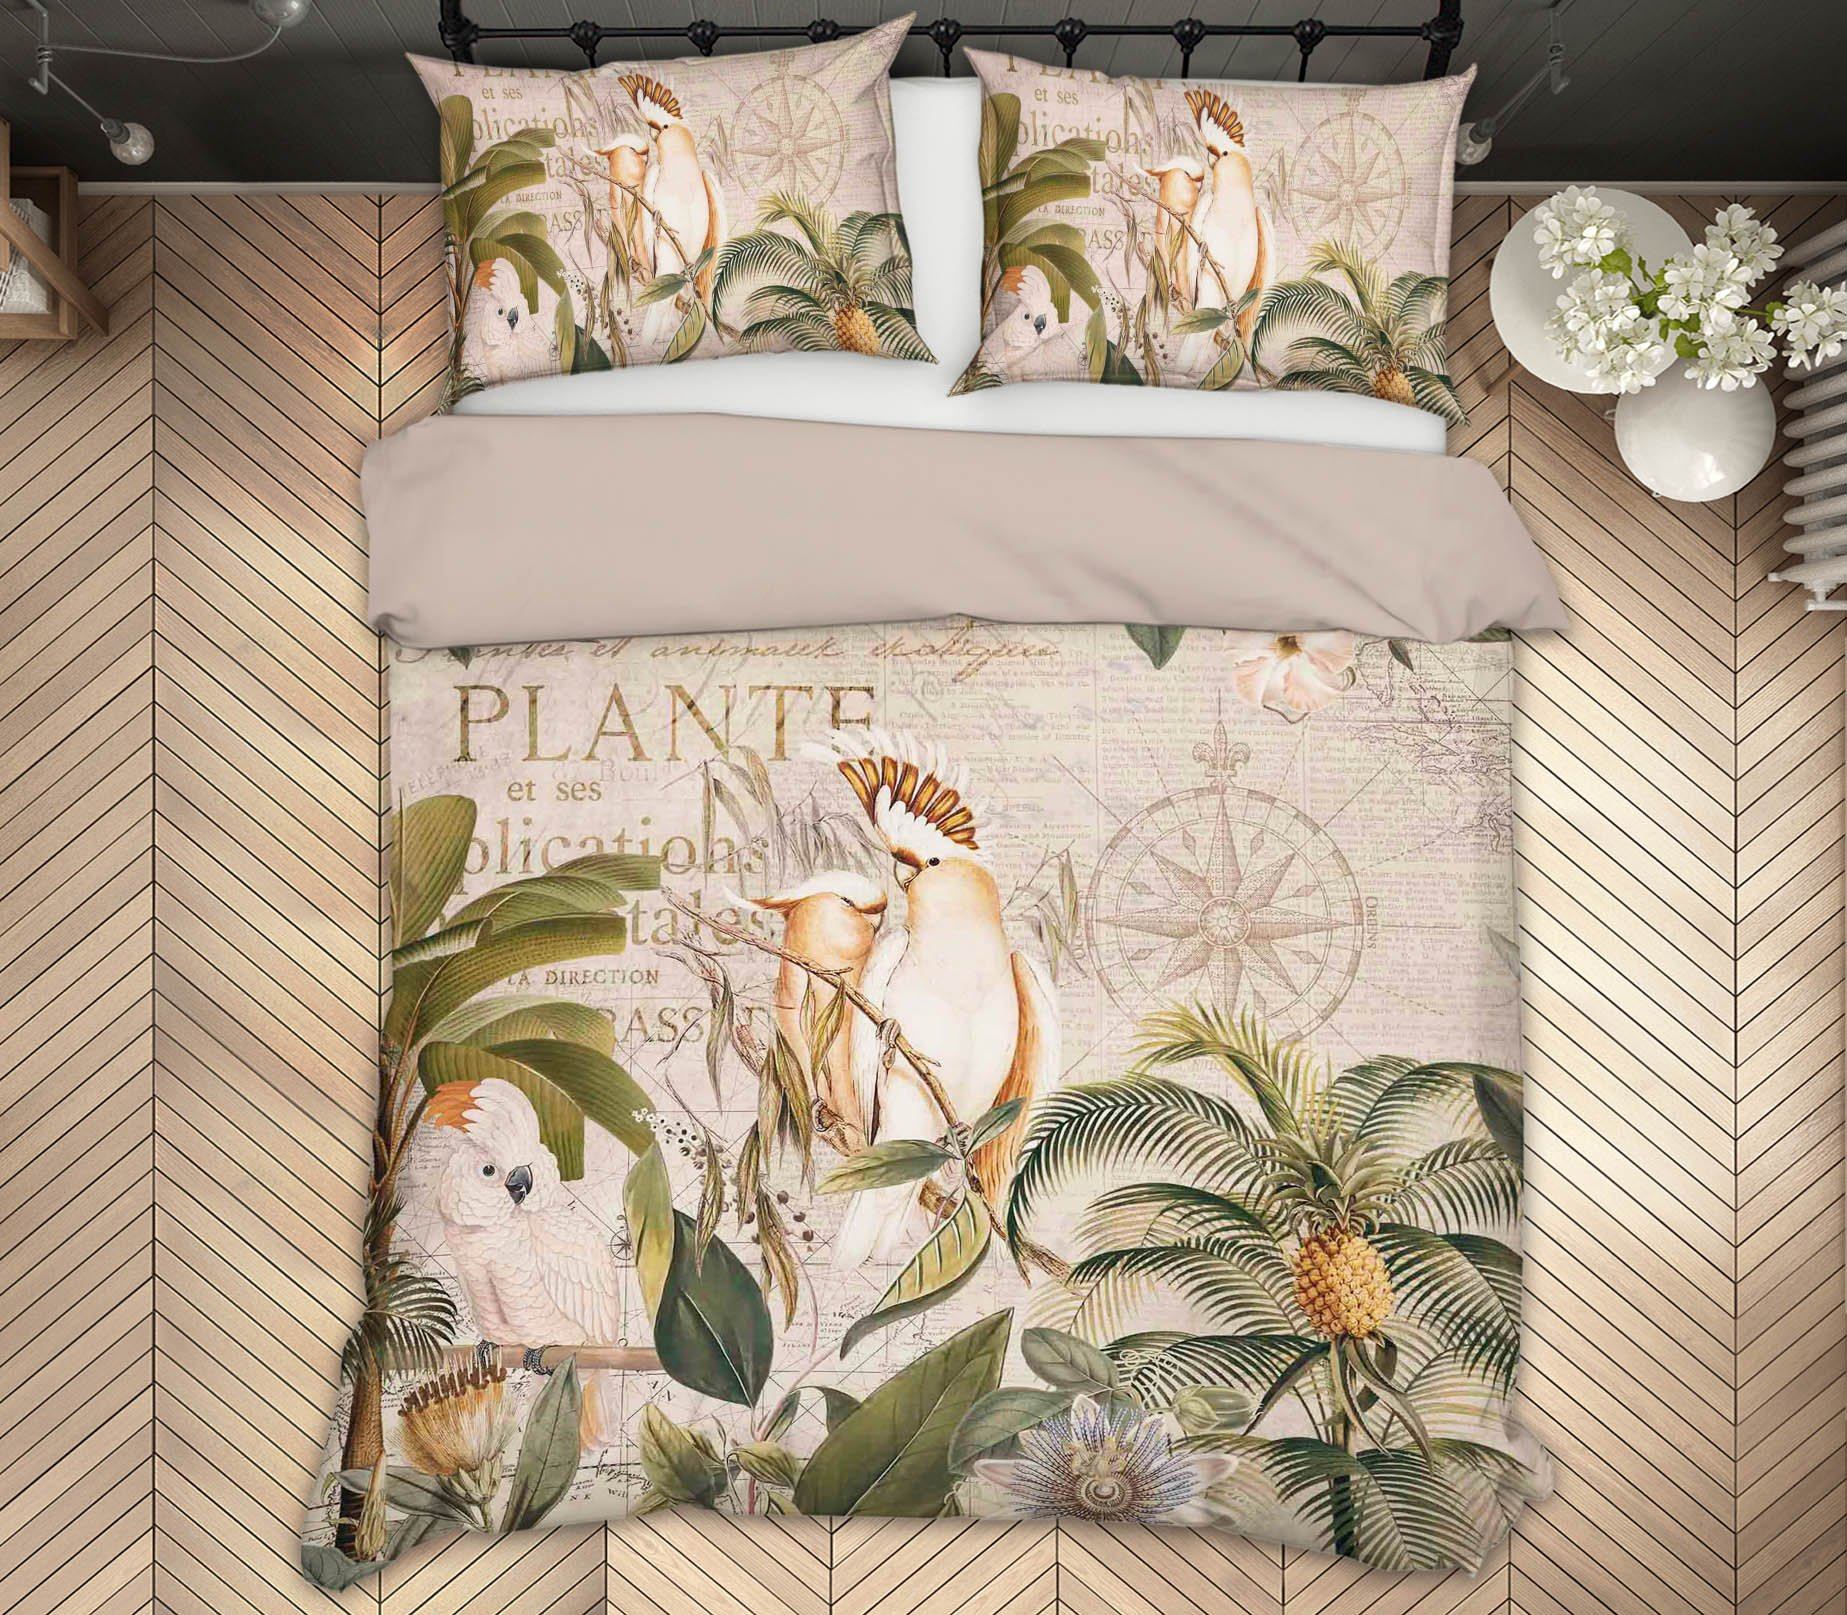 3D Branch Parrot 2143 Andrea haase Bedding Bed Pillowcases Quilt Quiet Covers AJ Creativity Home 